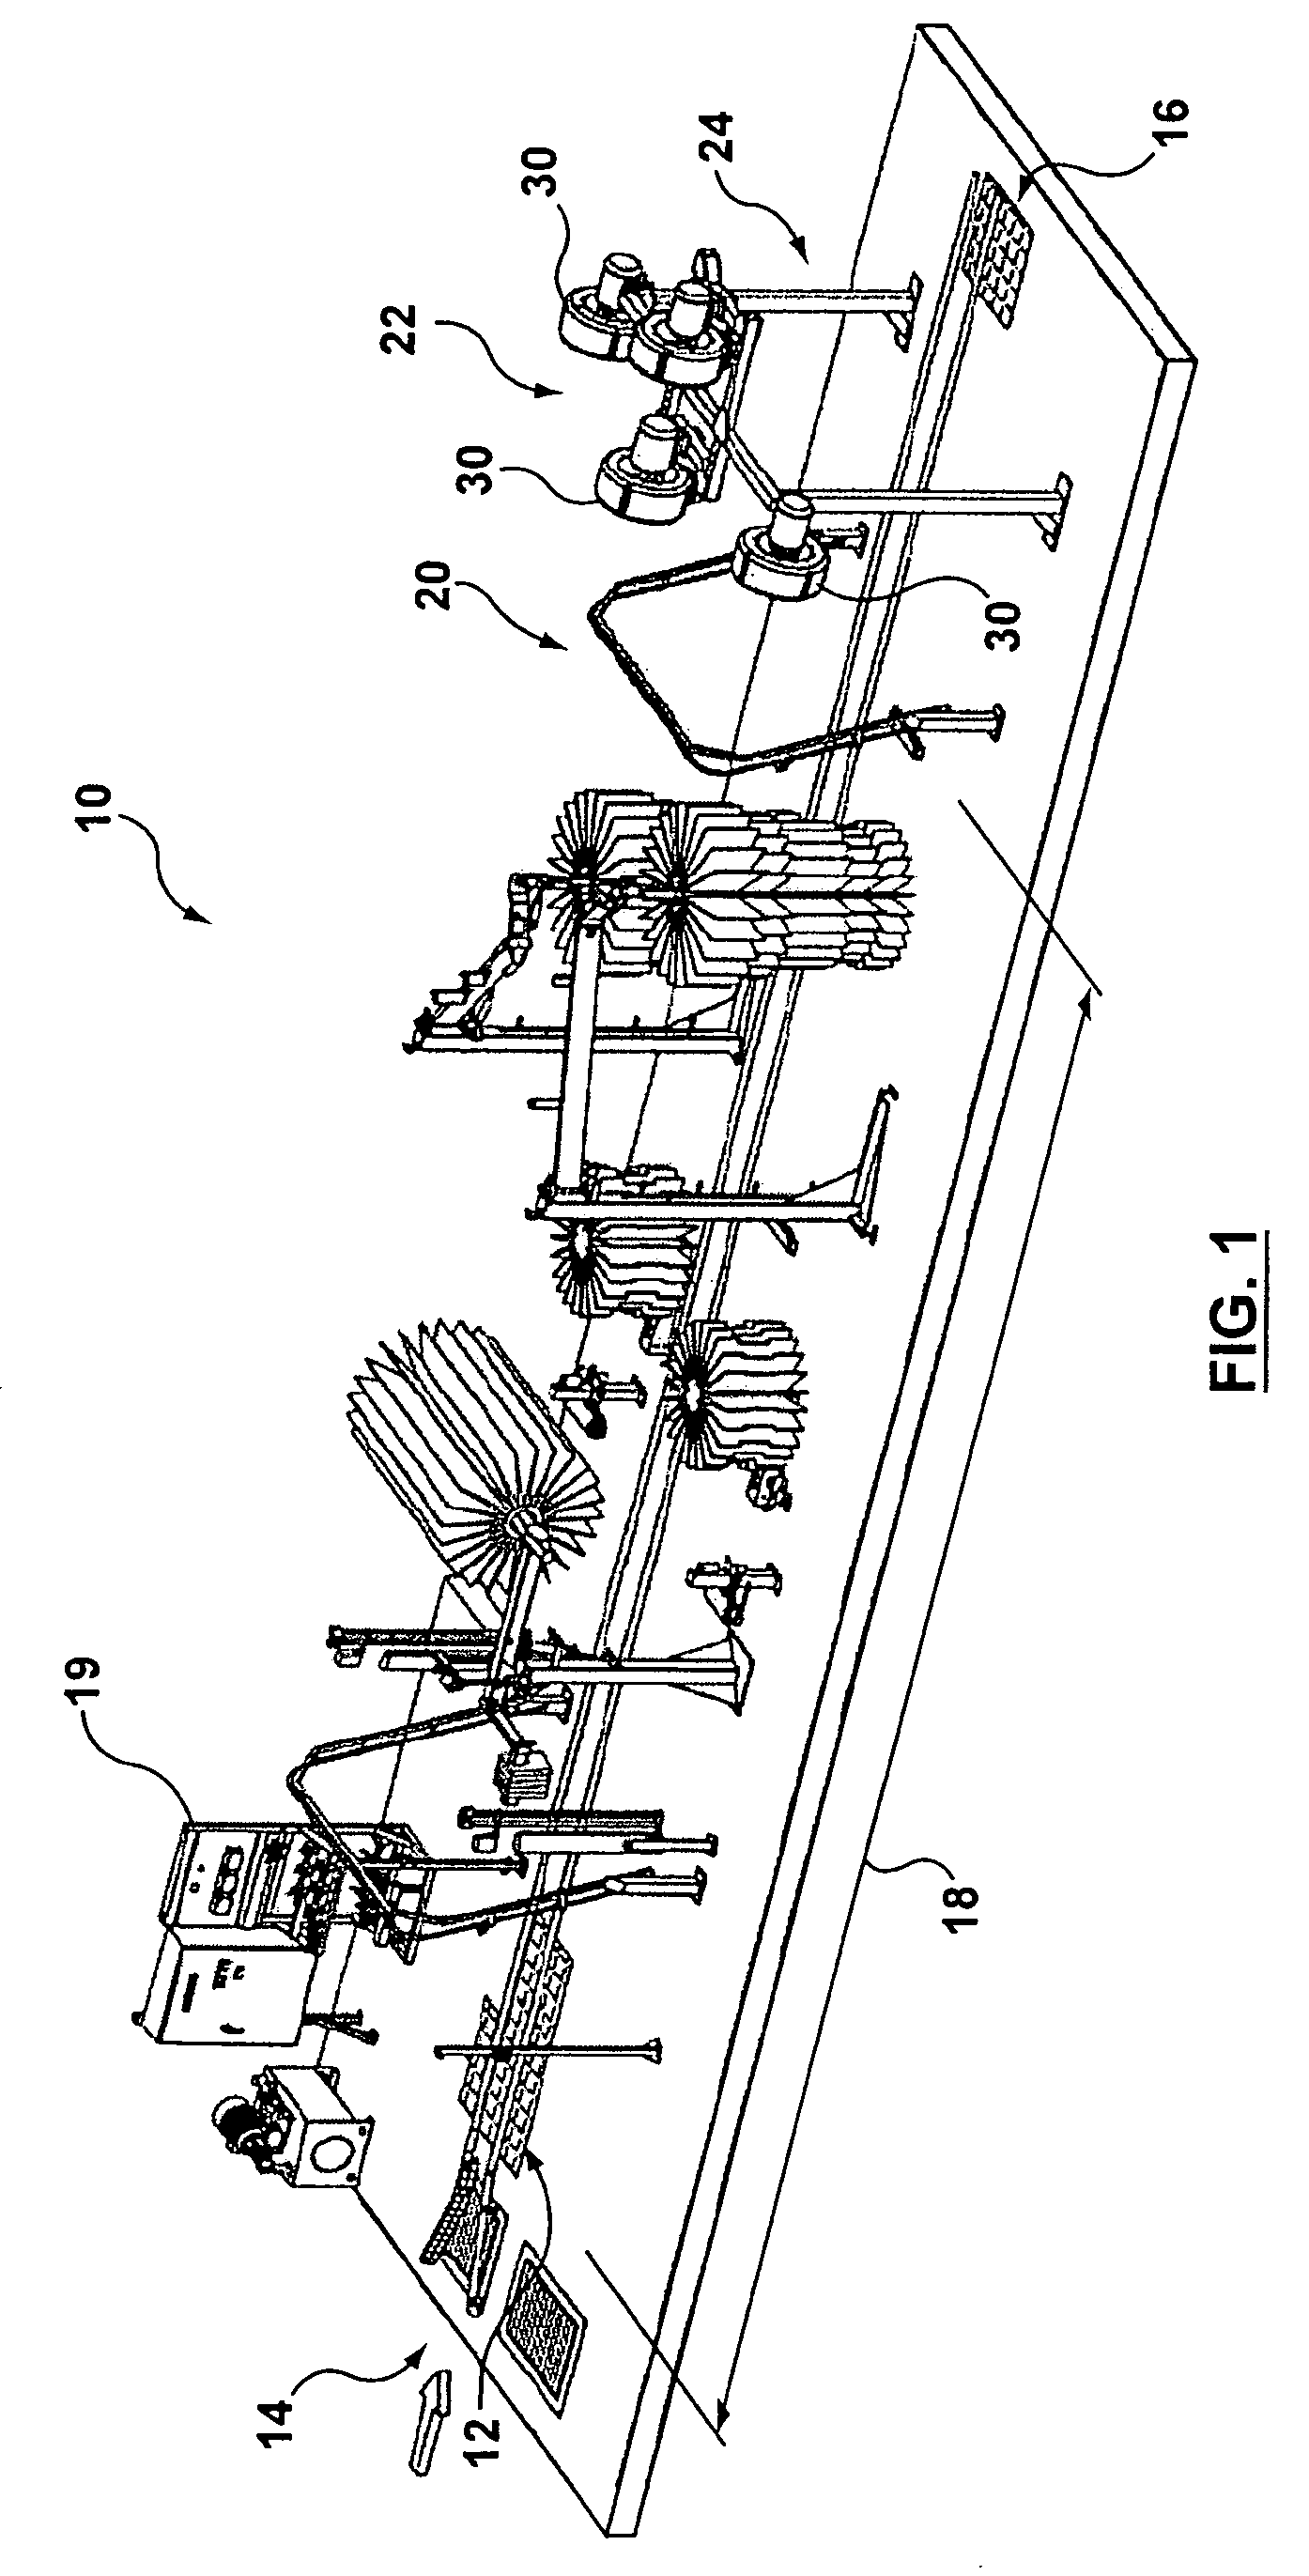 Intake control for blower in vehicle wash system